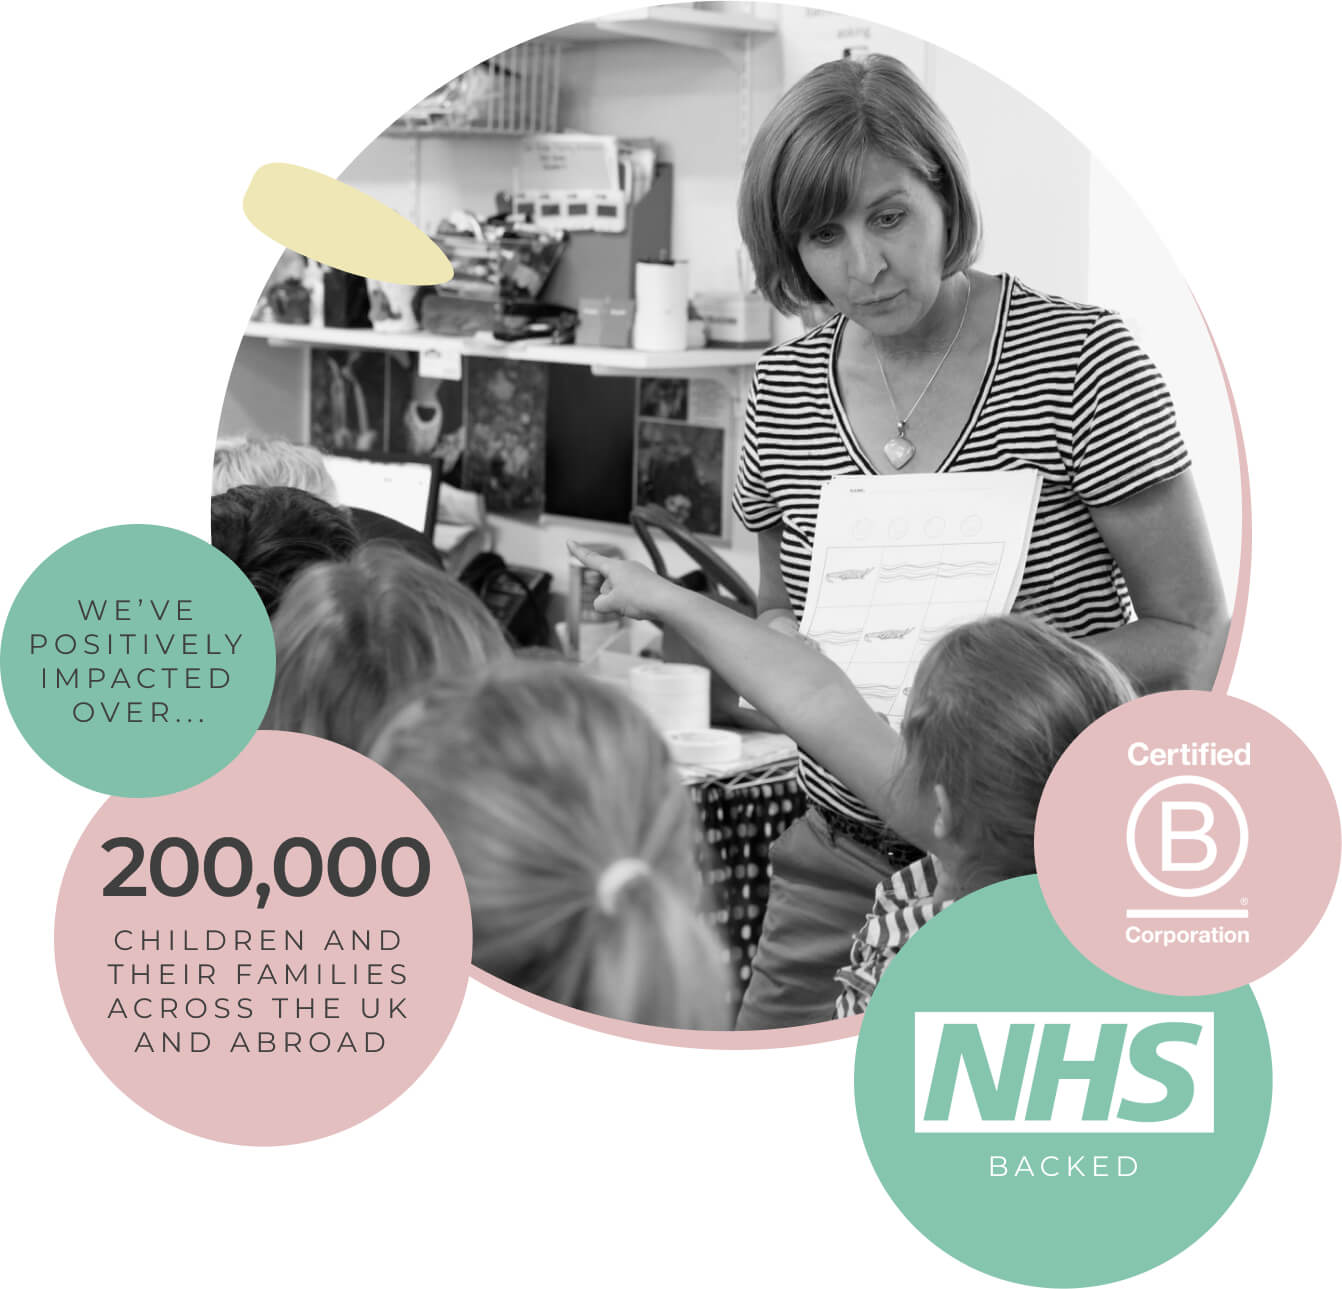 myHappymind for Schools mental health and wellbeing program image with NHS backed and B Corp logos. Bubbles with text stating how myHappymind has positively affect over 200,000 children and Families across the UK and abroad.